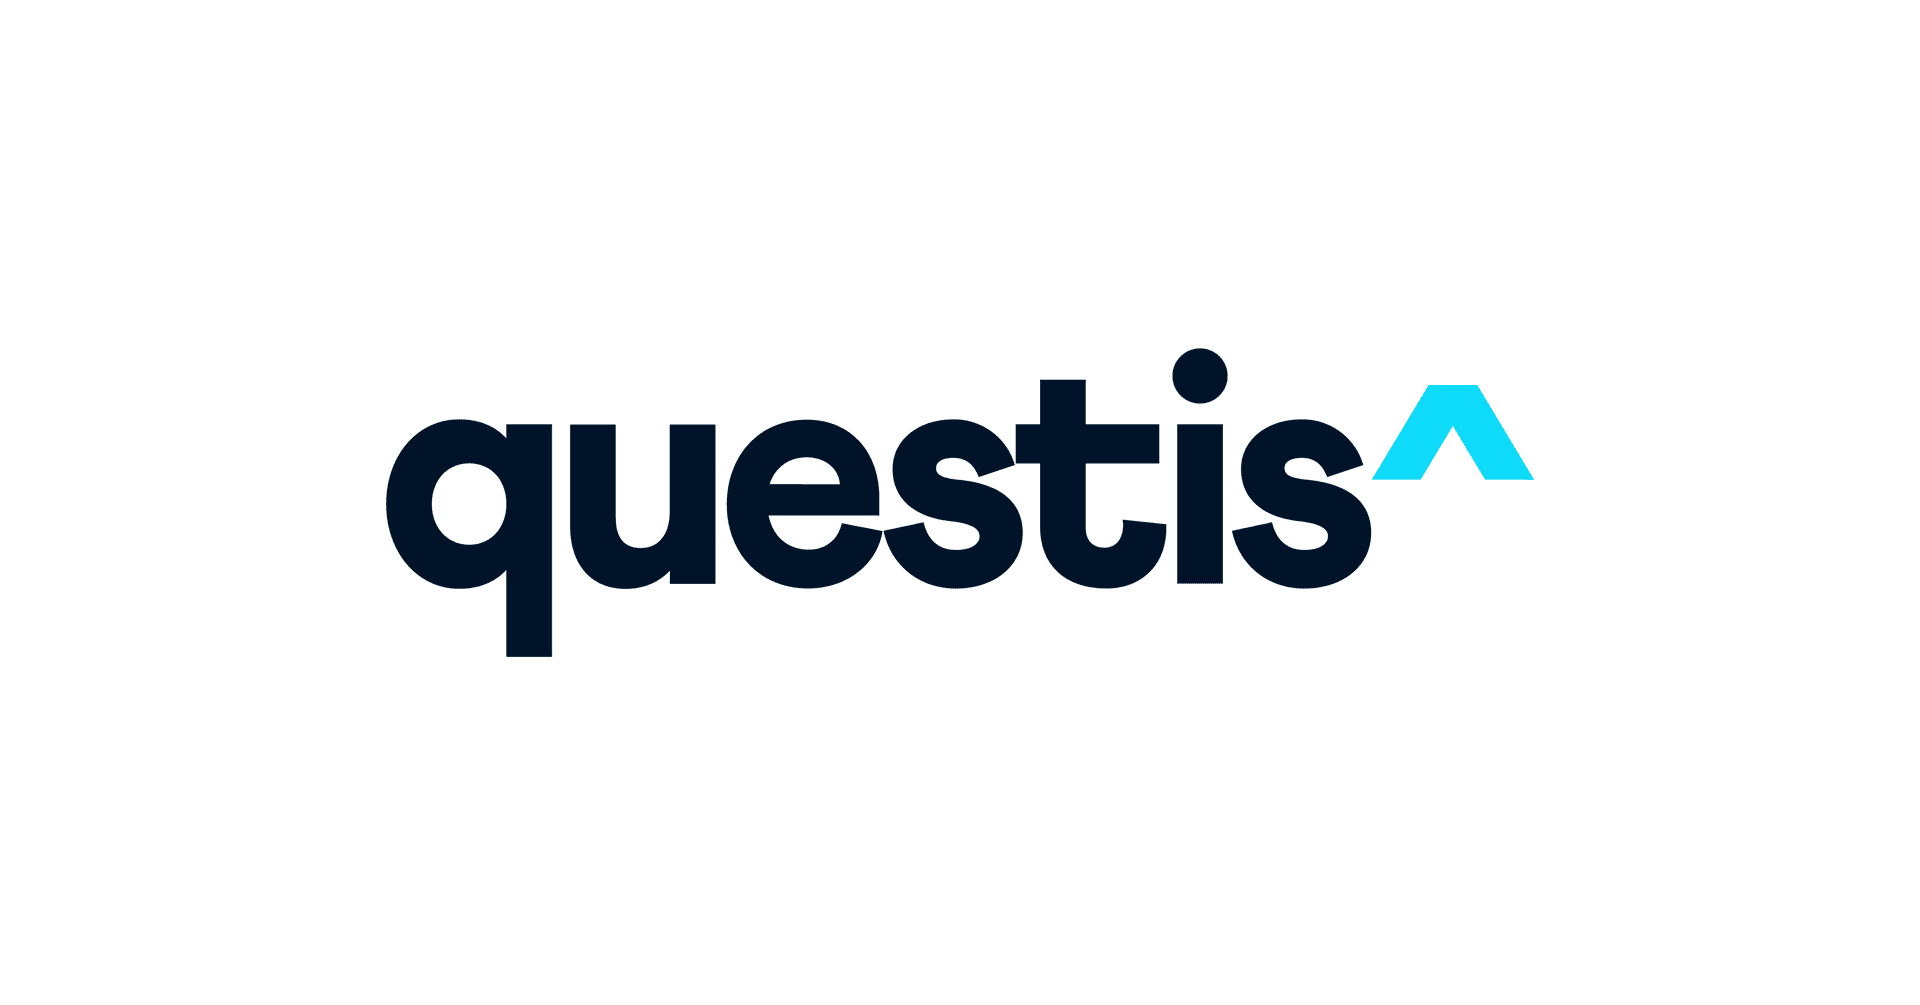 Questis, an Industry-Leading Workforce Financial Empowerment Company Announced its 2021 Rebrand